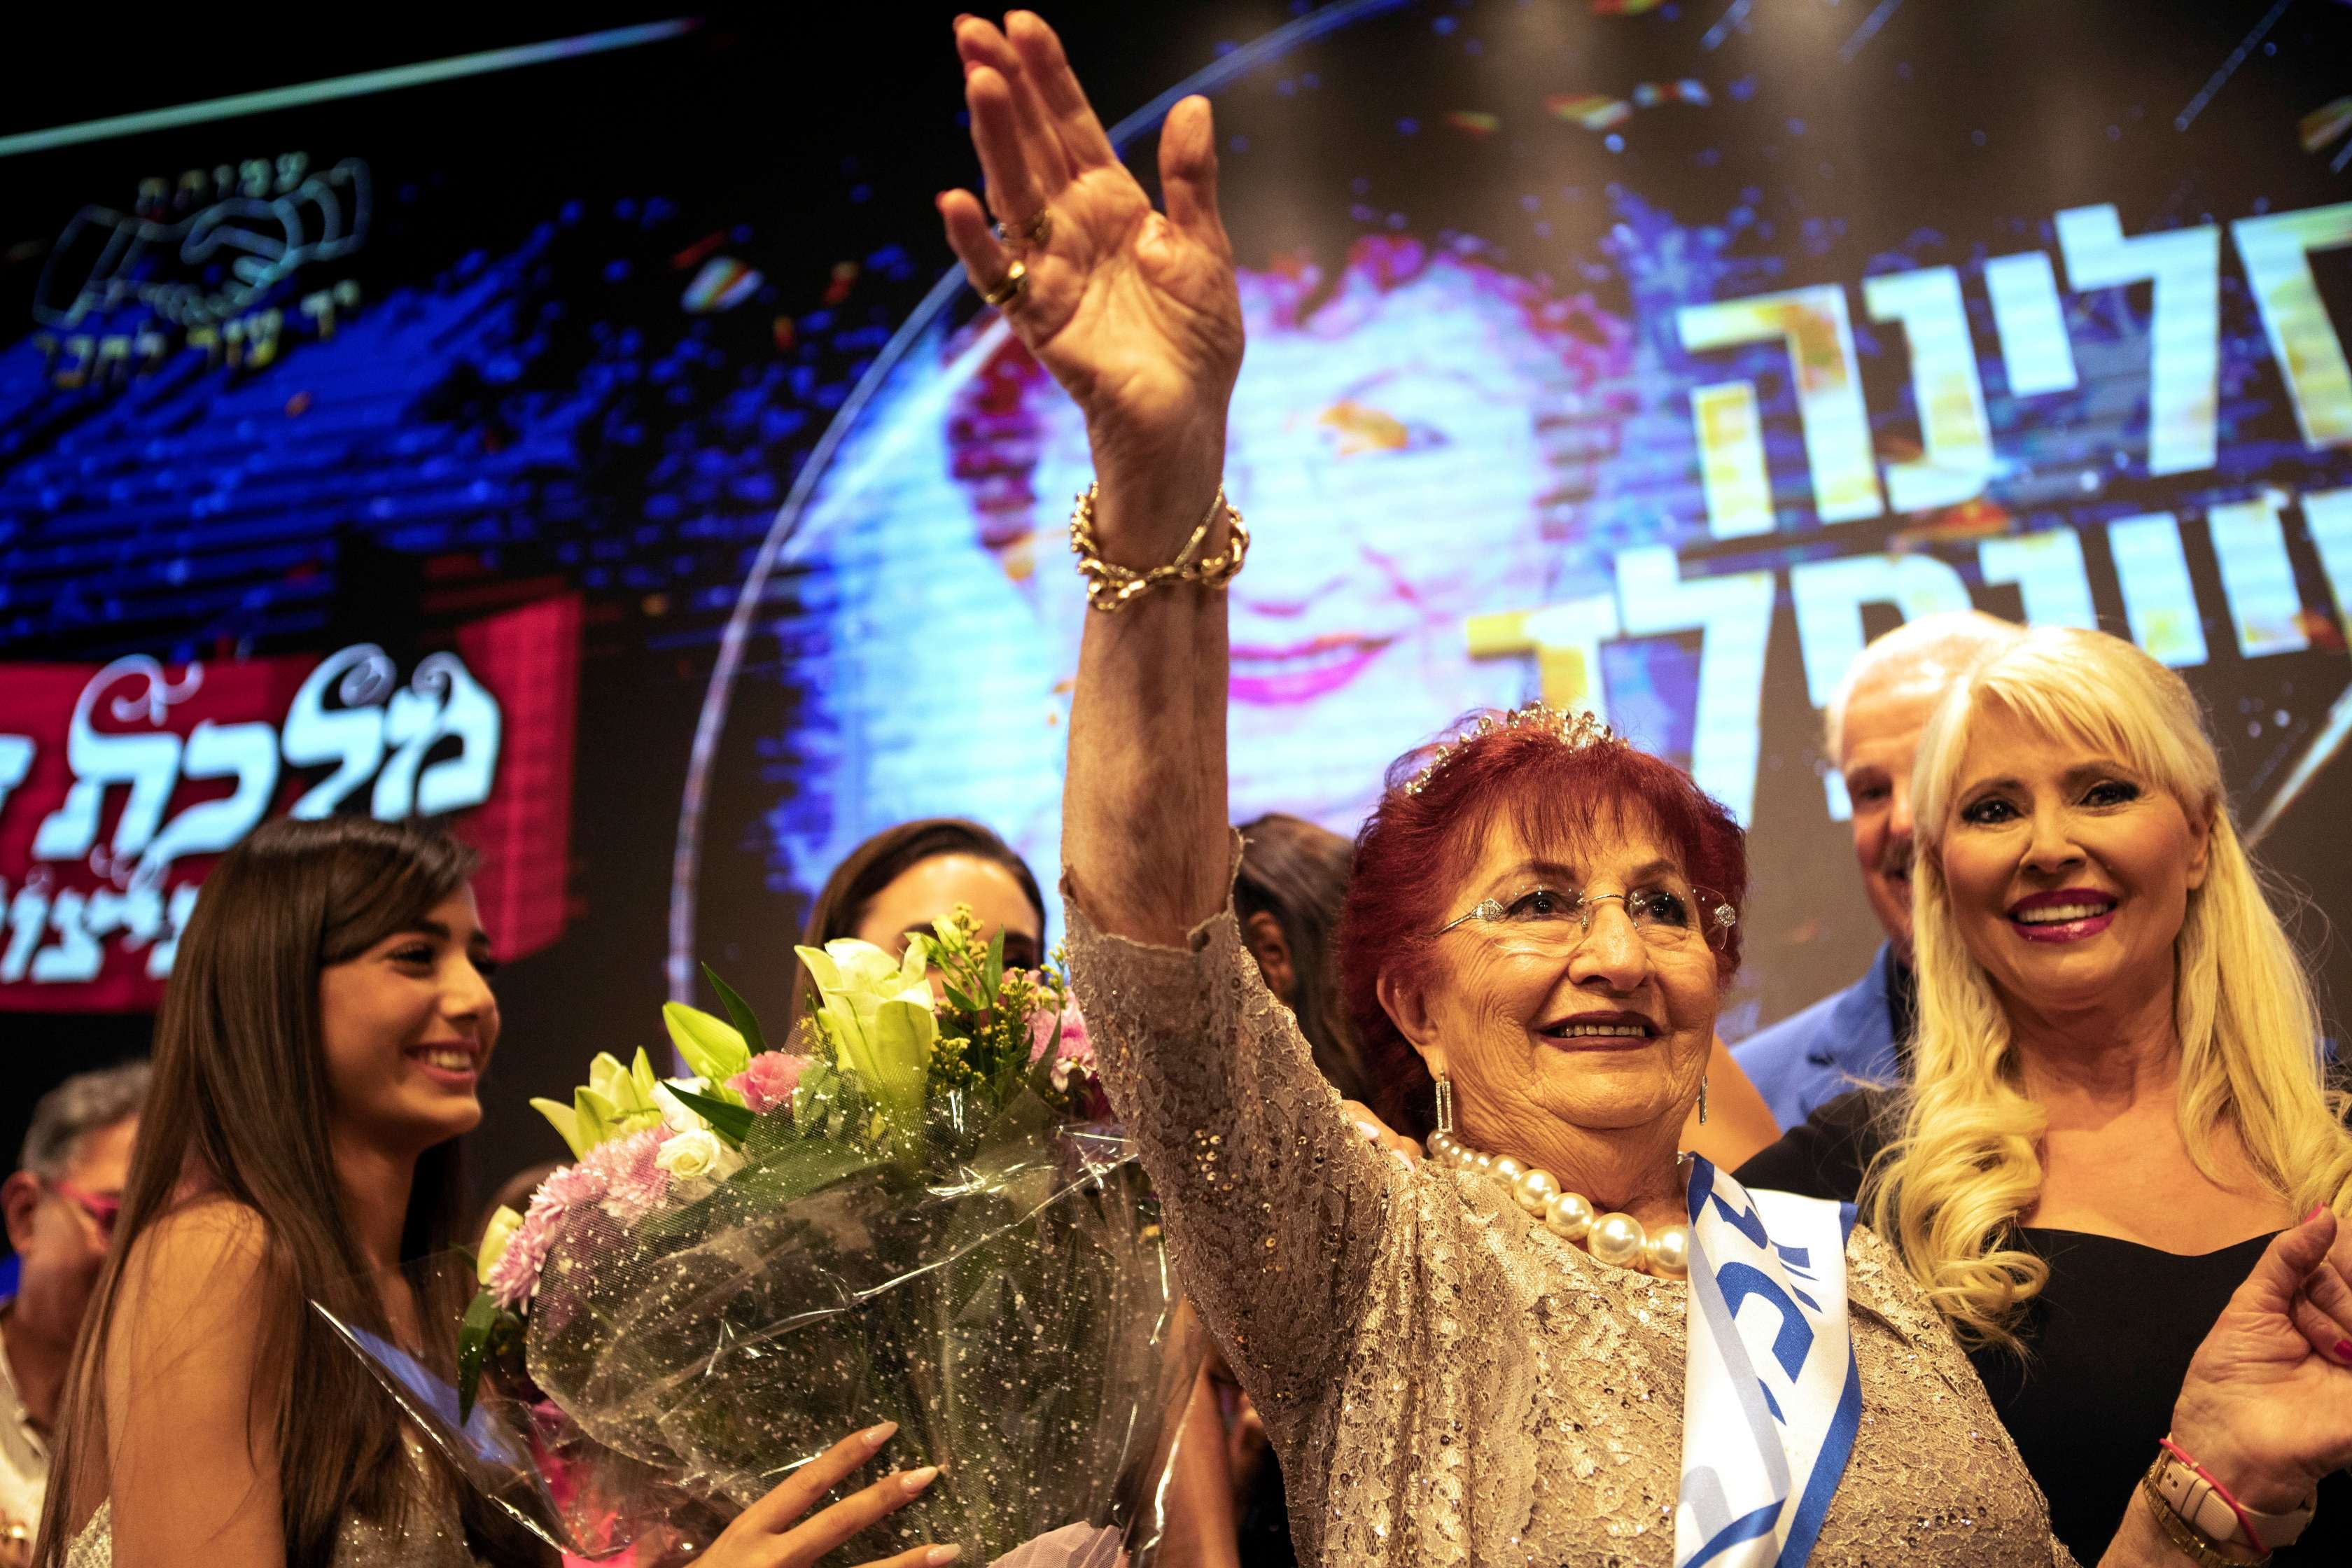 An 86-year-old crowned ‘Miss Holocaust Survivor’ in Israeli pageant